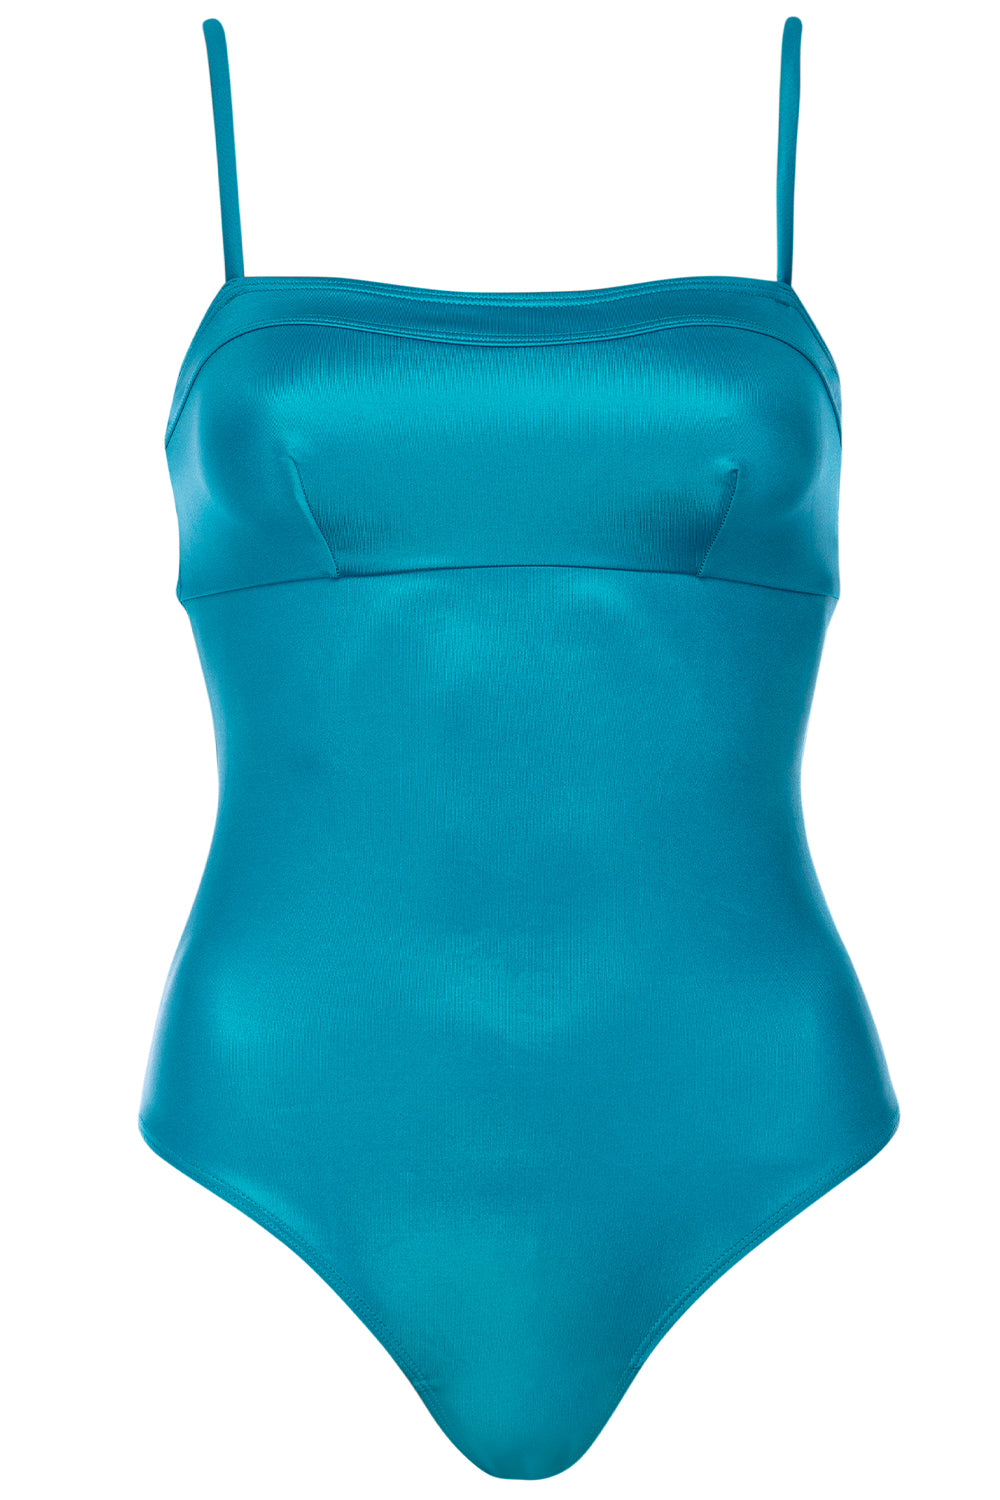 Hamptons Teal Swimsuit on white background front view.